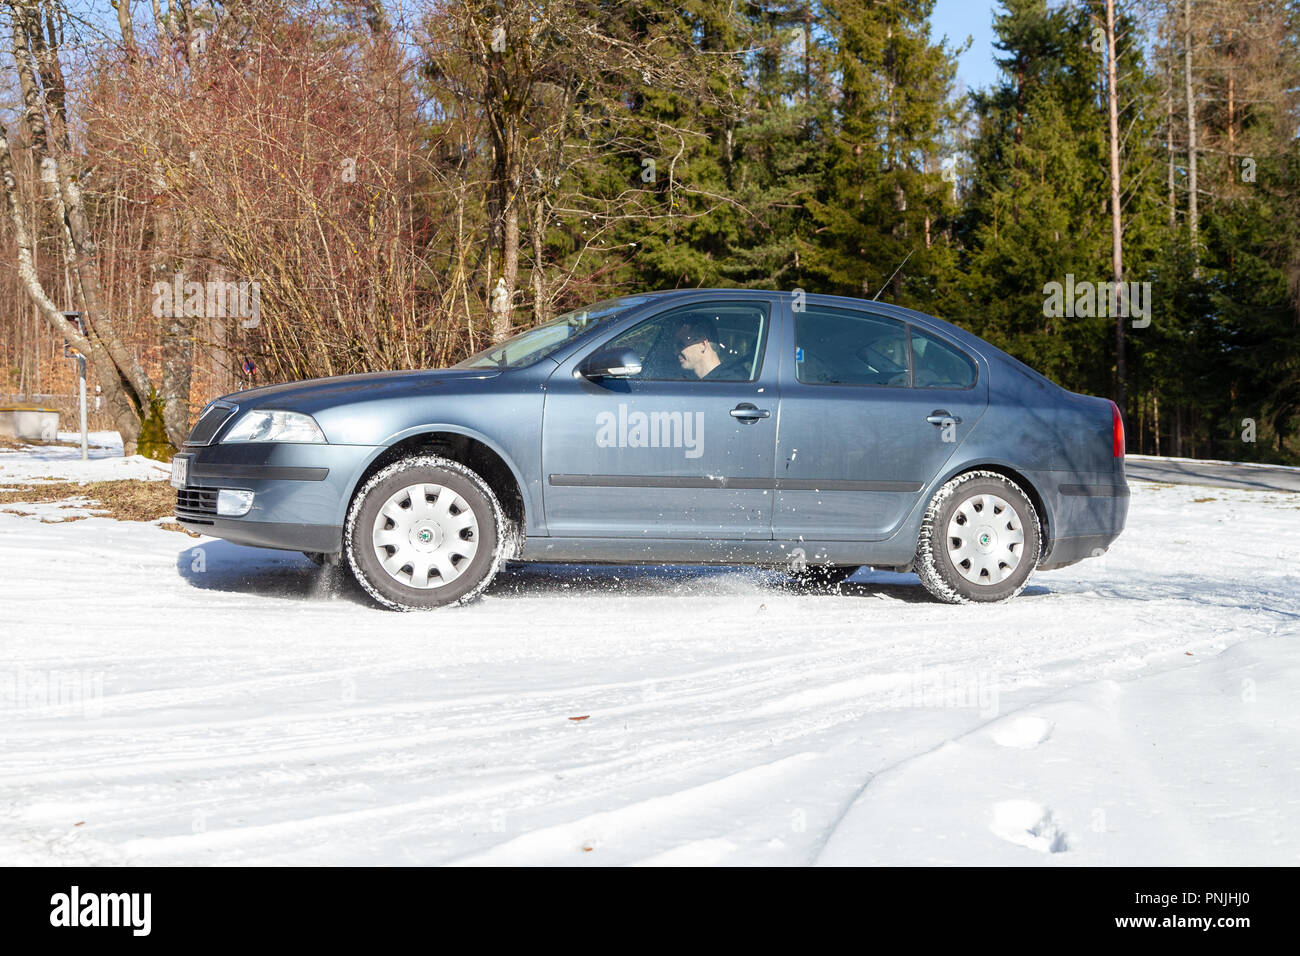 MUNICH / GERMANY - FEBRUARY 22, 2018: Skoda Octavia drives off road on a snow track. The Octavia is a small family car produced by the Czech manufactu Stock Photo